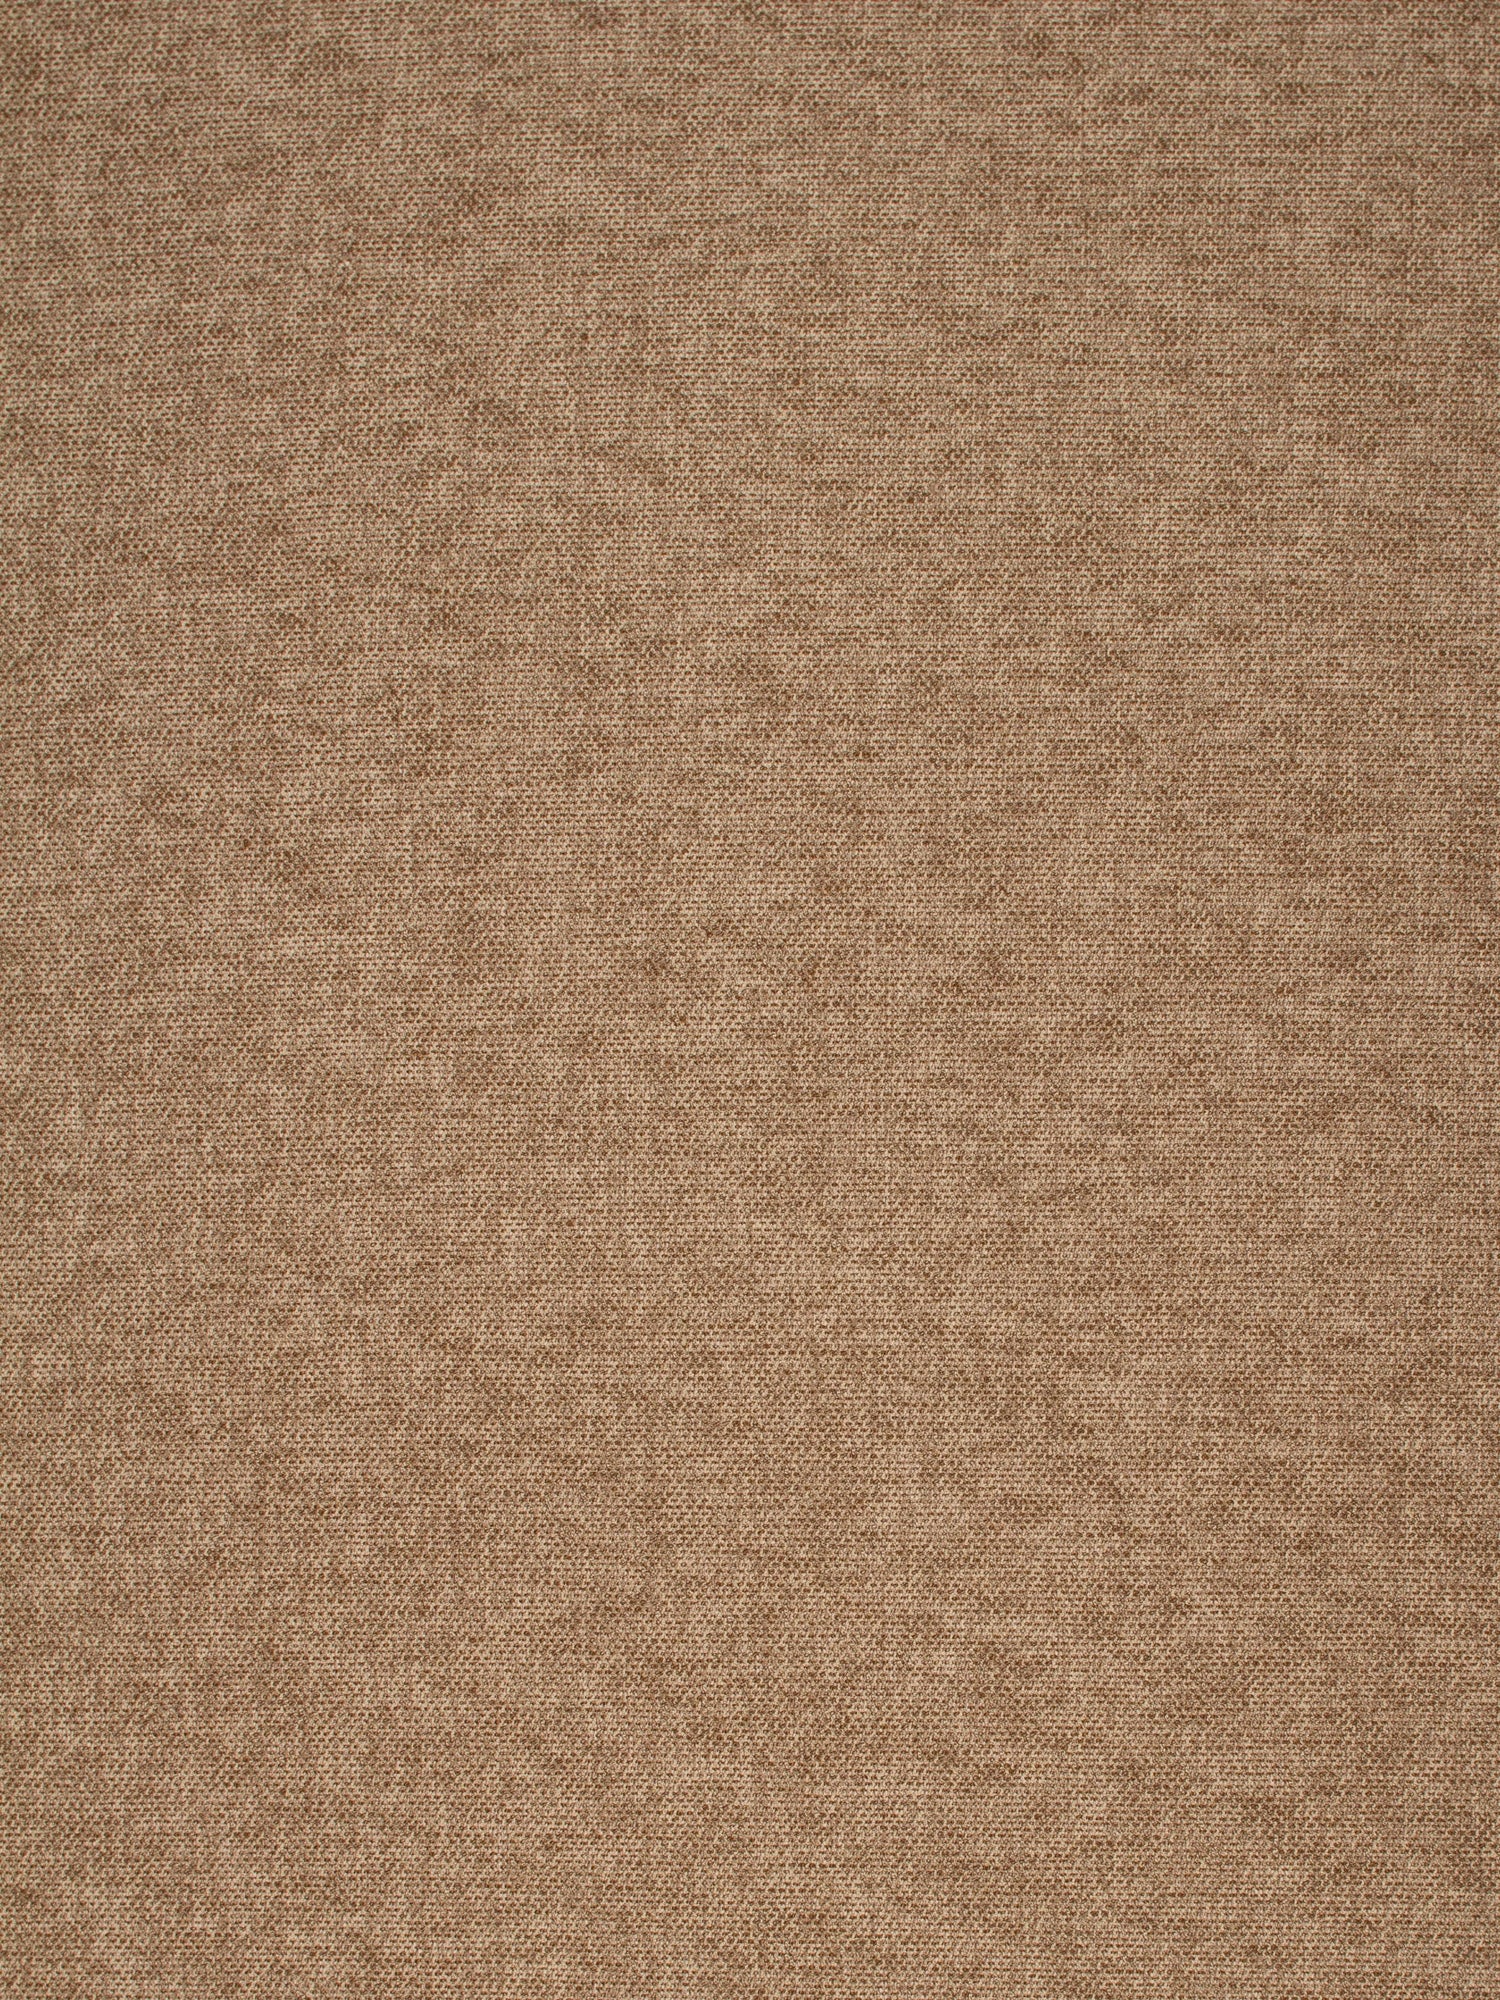 Sierra Oww fabric in wheat field color - pattern number PN 05121090 - by Scalamandre in the Old World Weavers collection